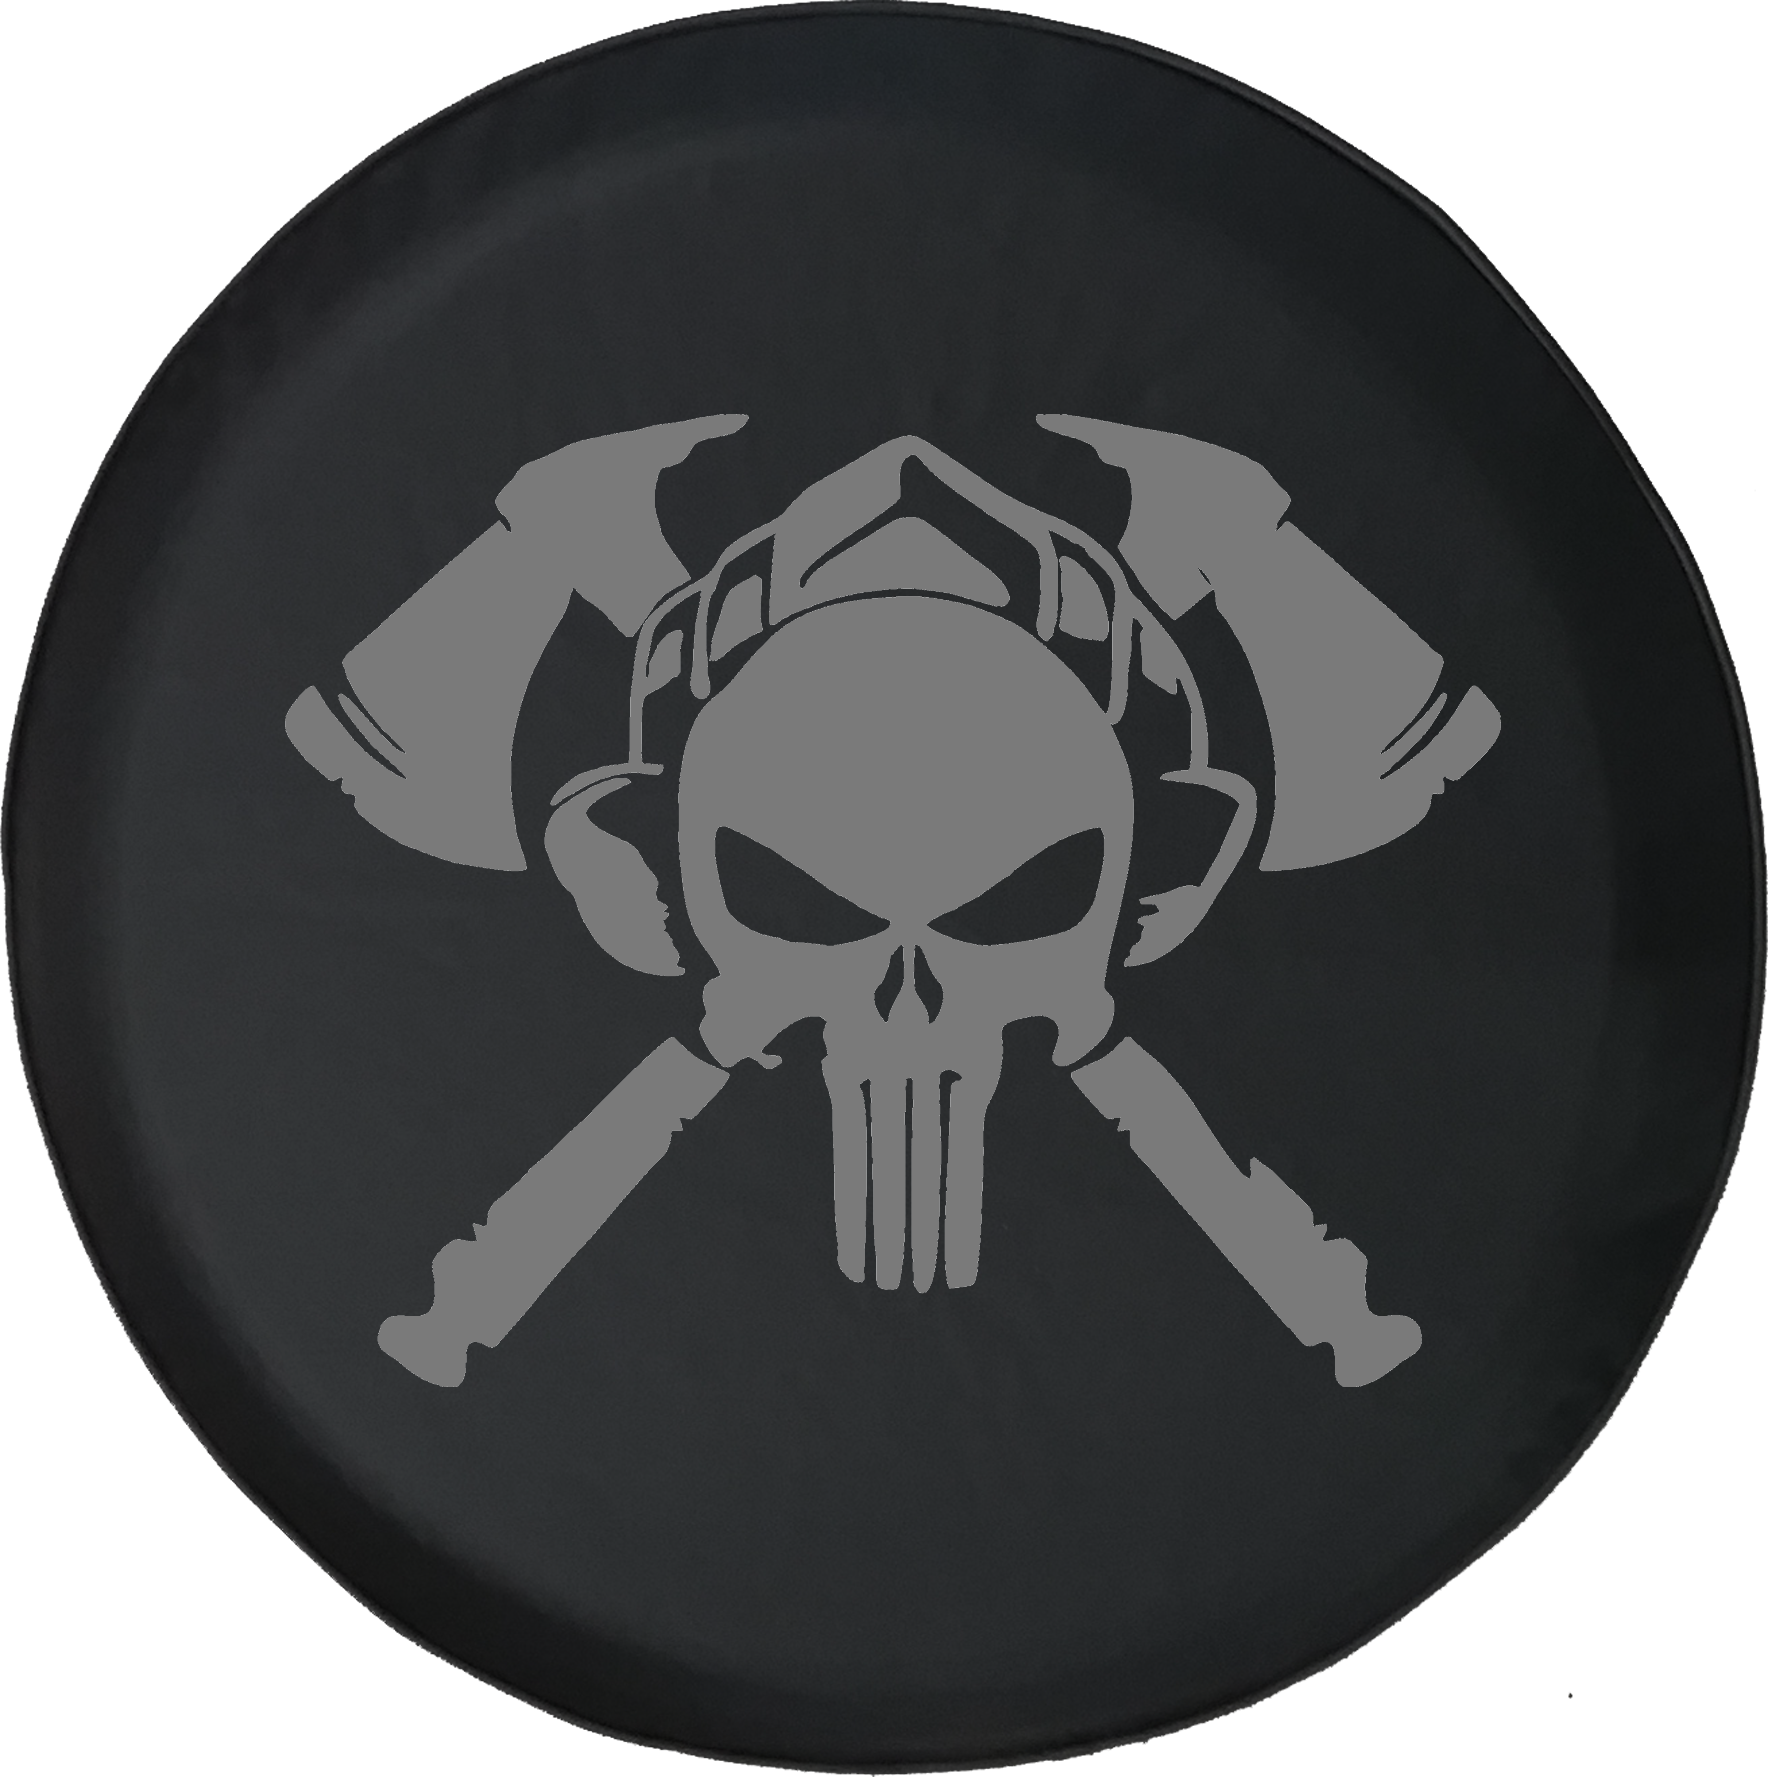 Tire Cover PRO | Fire Department Punisher Skull Shield Helmet with